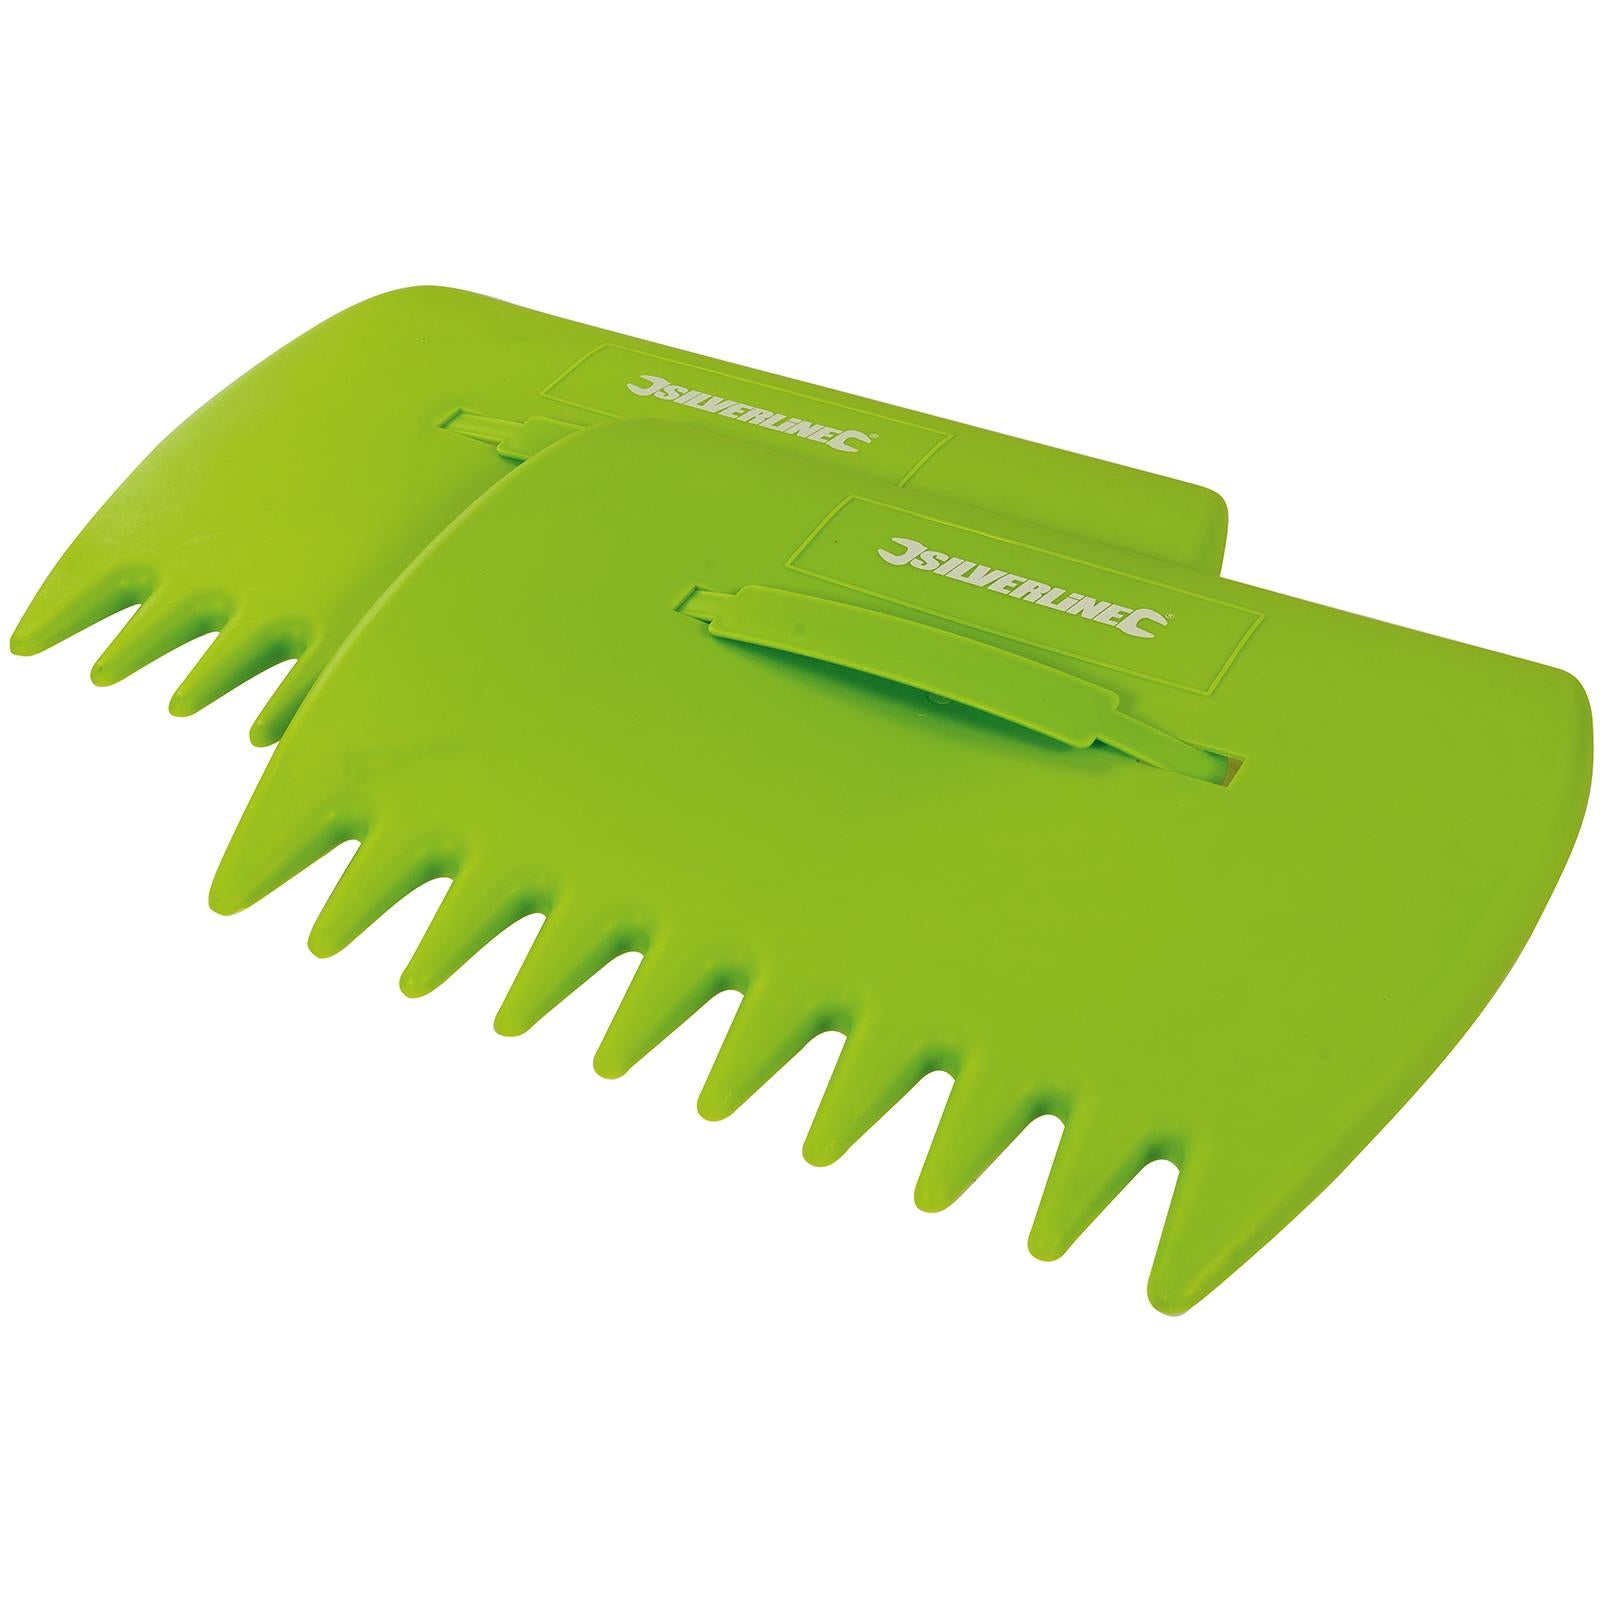 Silverline Leaf Collector 330x250mm Garden Waste Pronged Scoops Leaves